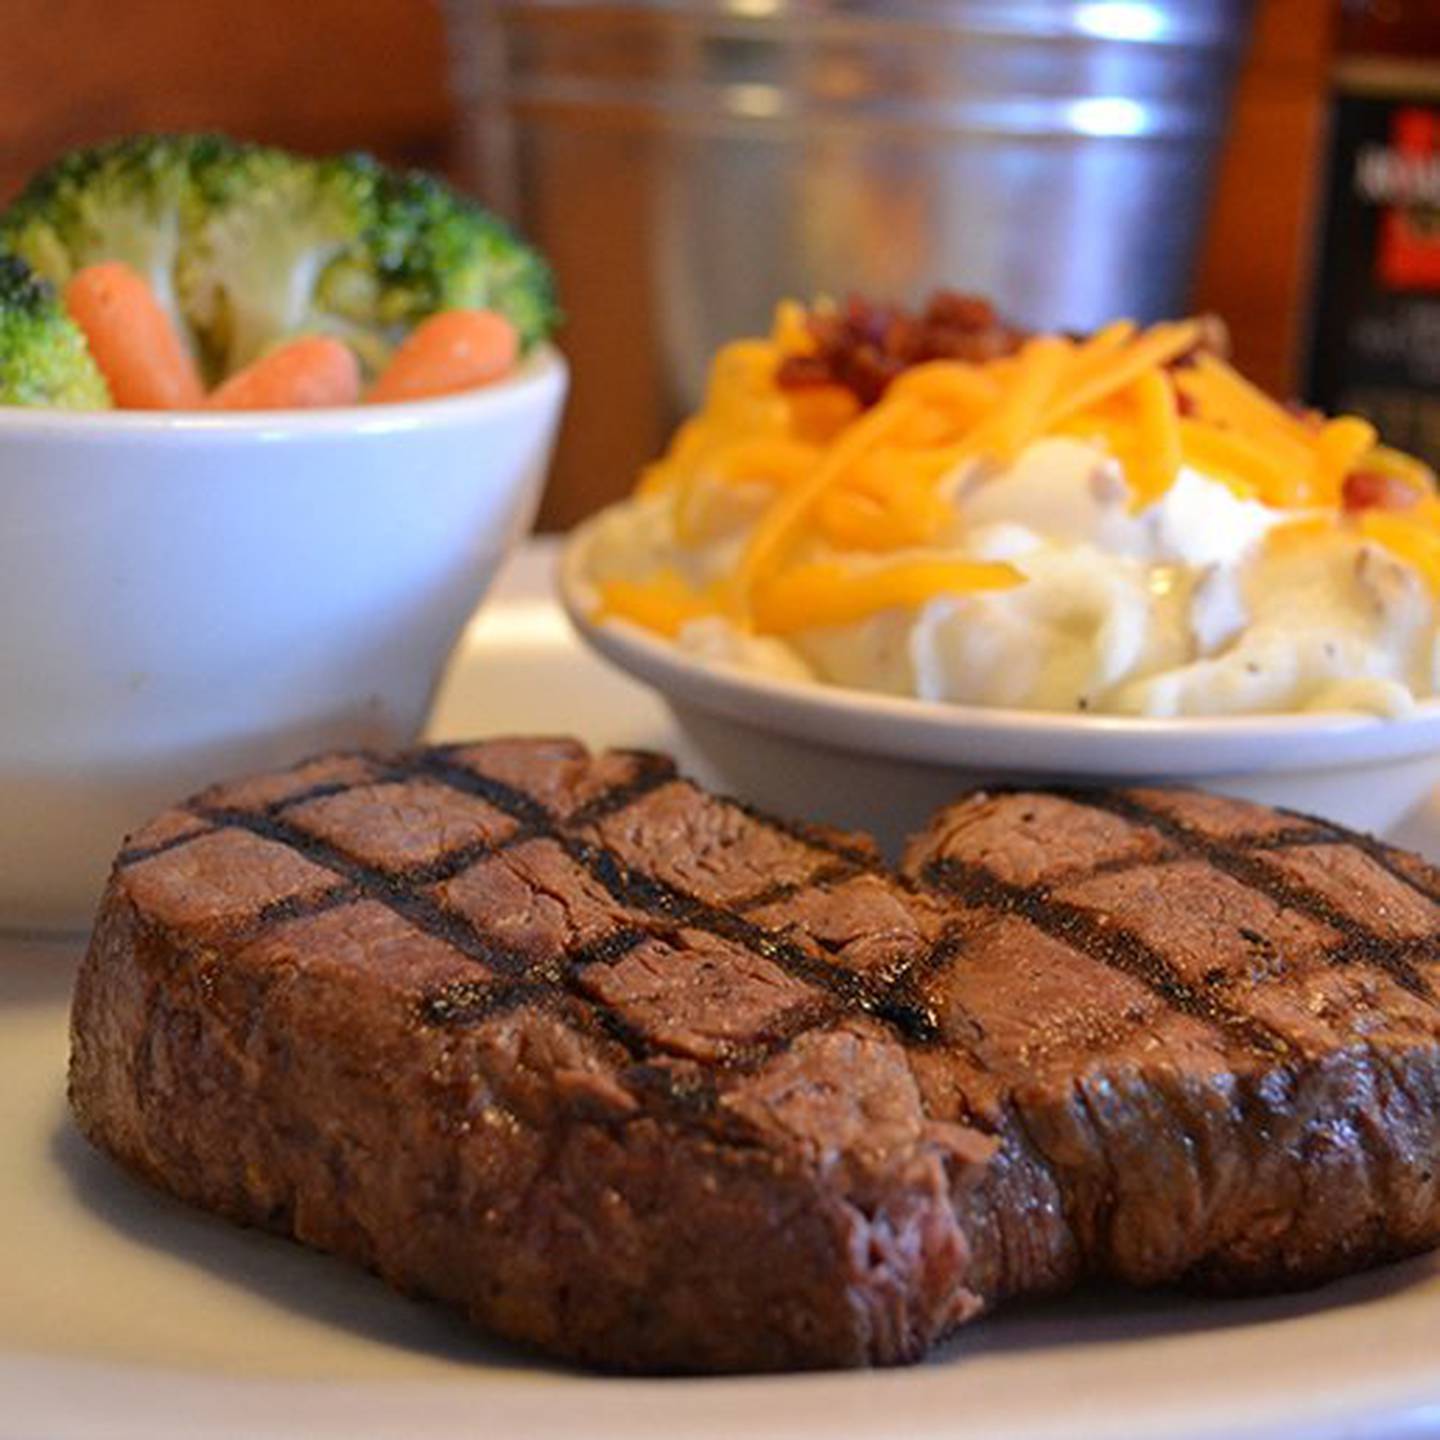 Texas Roadhouse in Crystal Lake was voted one of the best steakhouse places in McHenry County by readers in 2021. (Photo from Texas Roadhouse Crystal Lake, IL Facebook page)